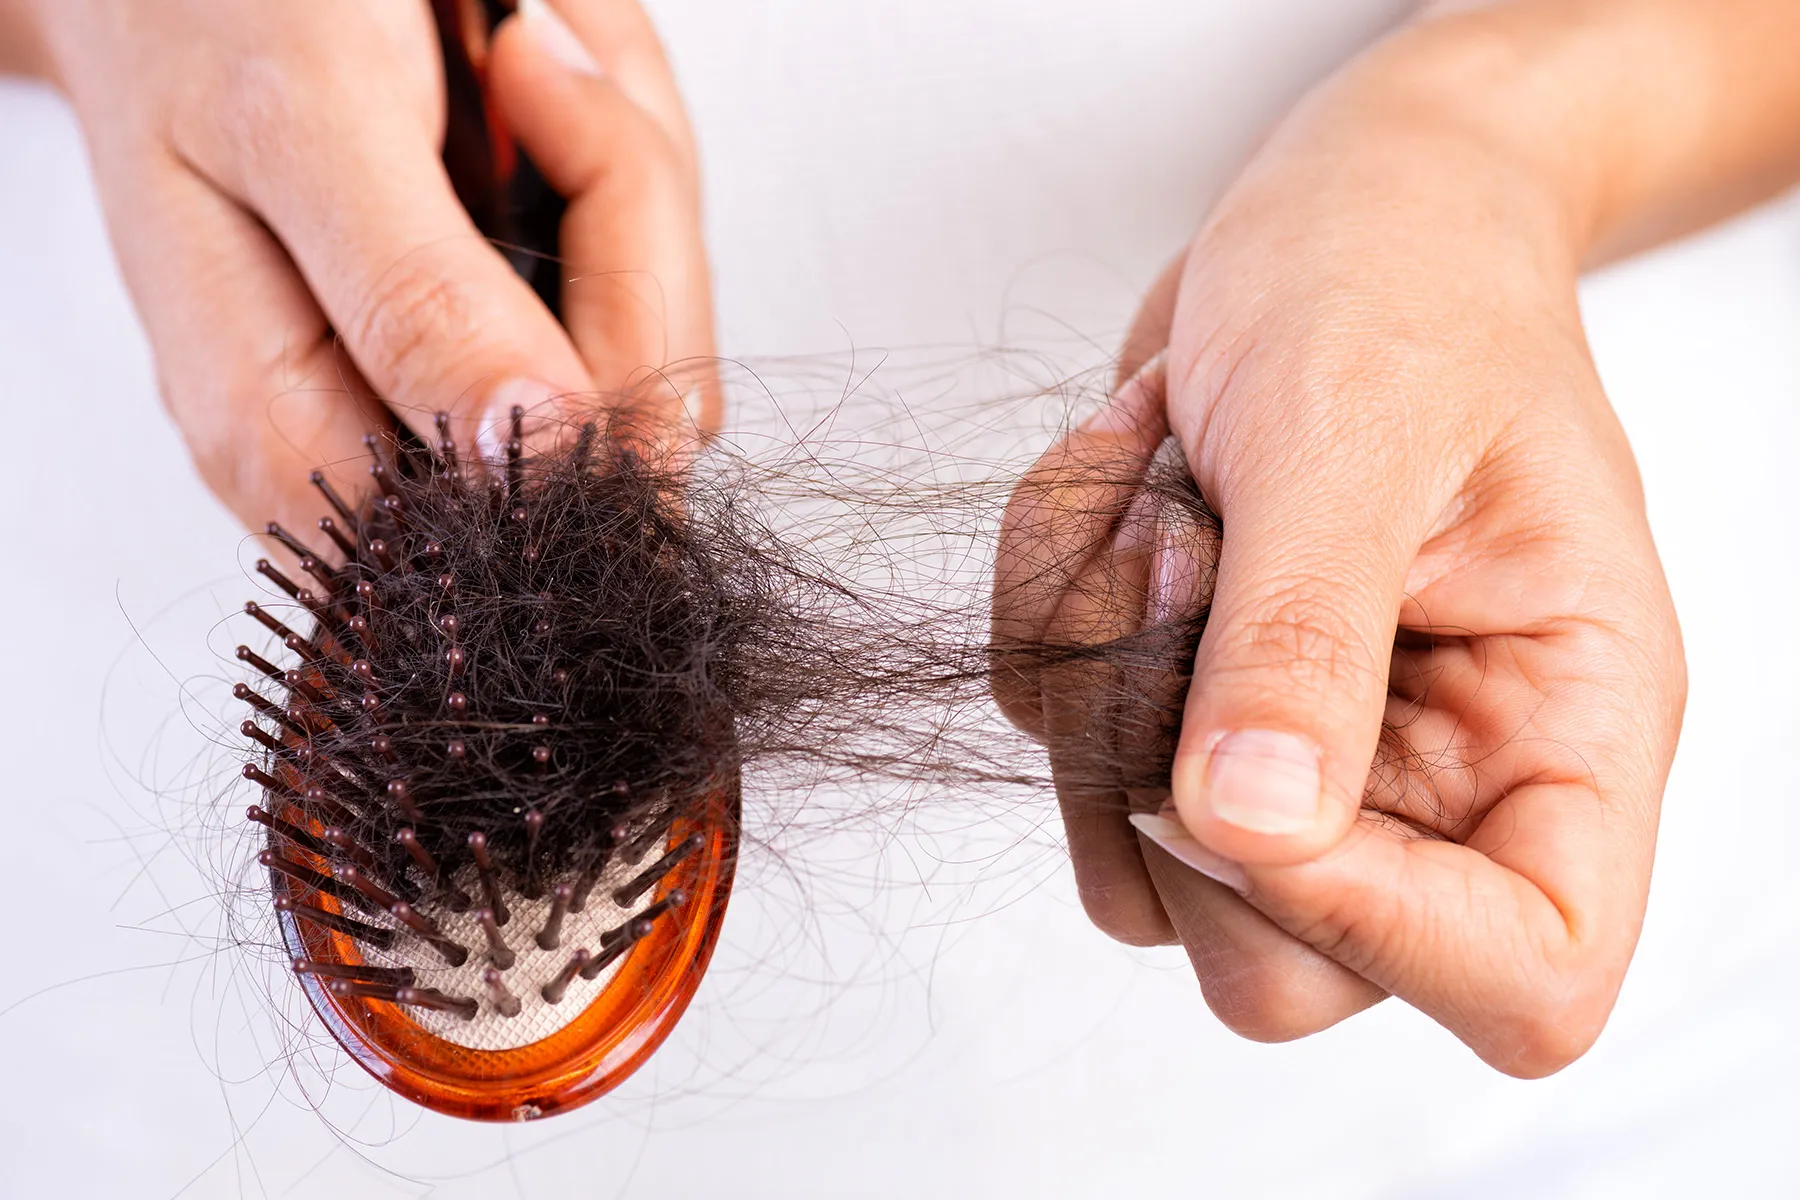 Do Weight Loss Drugs Like Ozempic Cause Hair Loss?